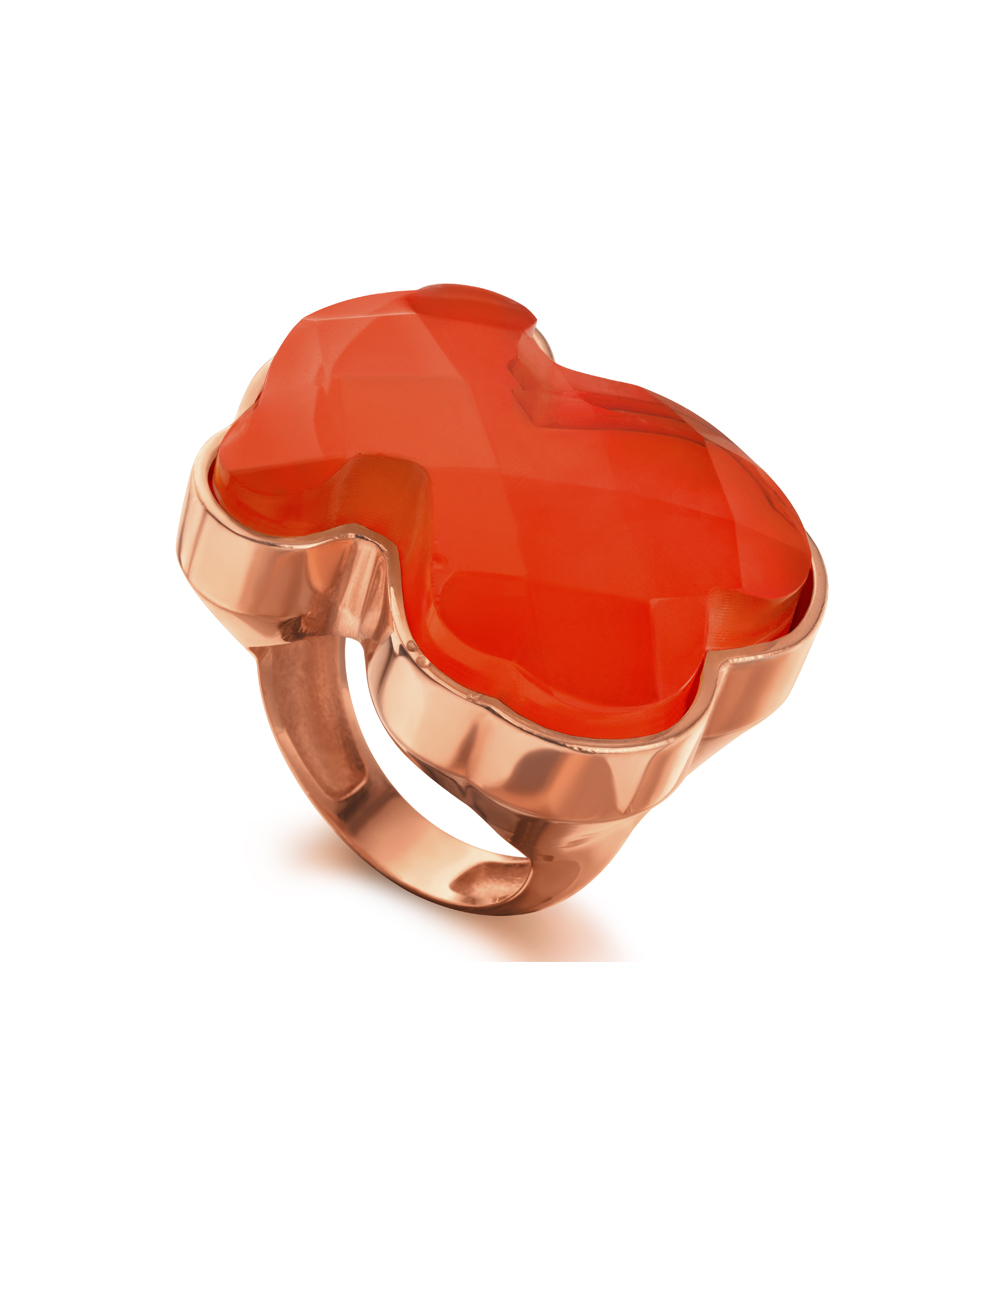 Ring, $375, by Tous.